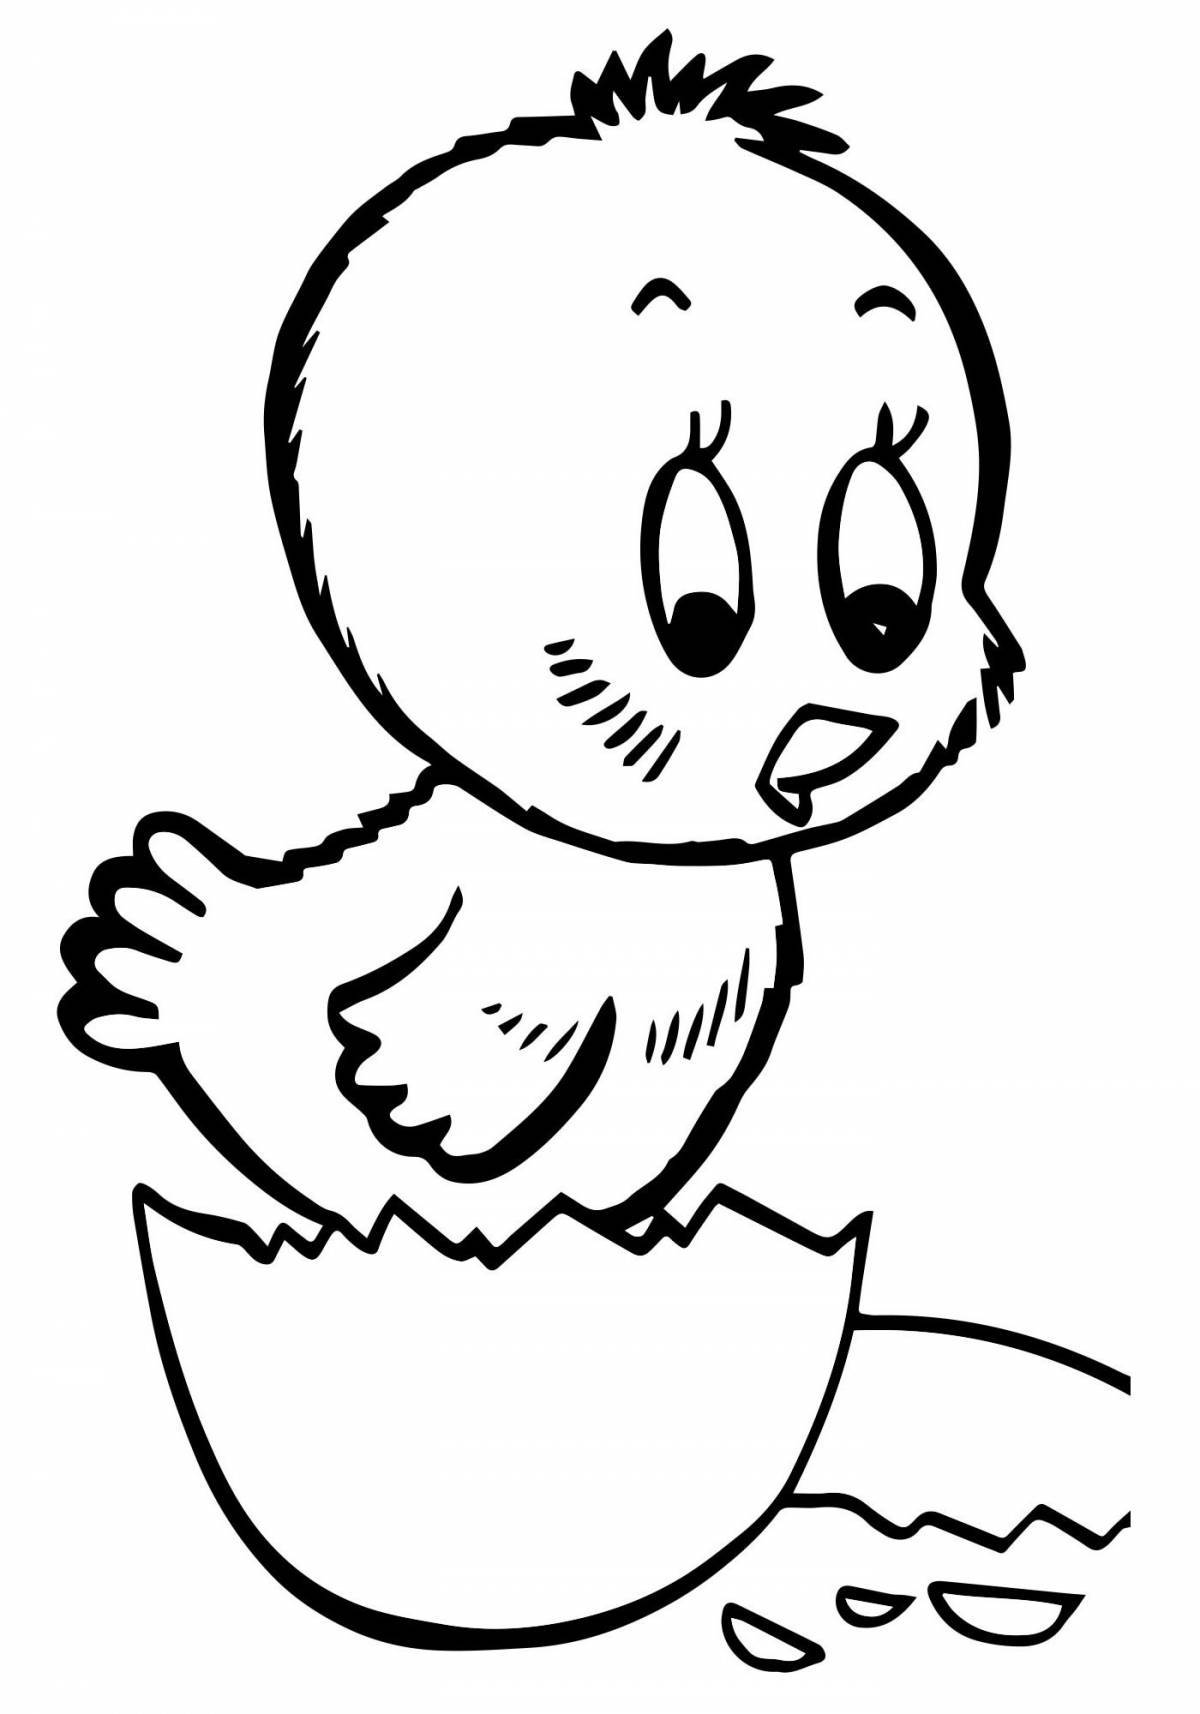 Adorable chick coloring page for kids 2-3 years old